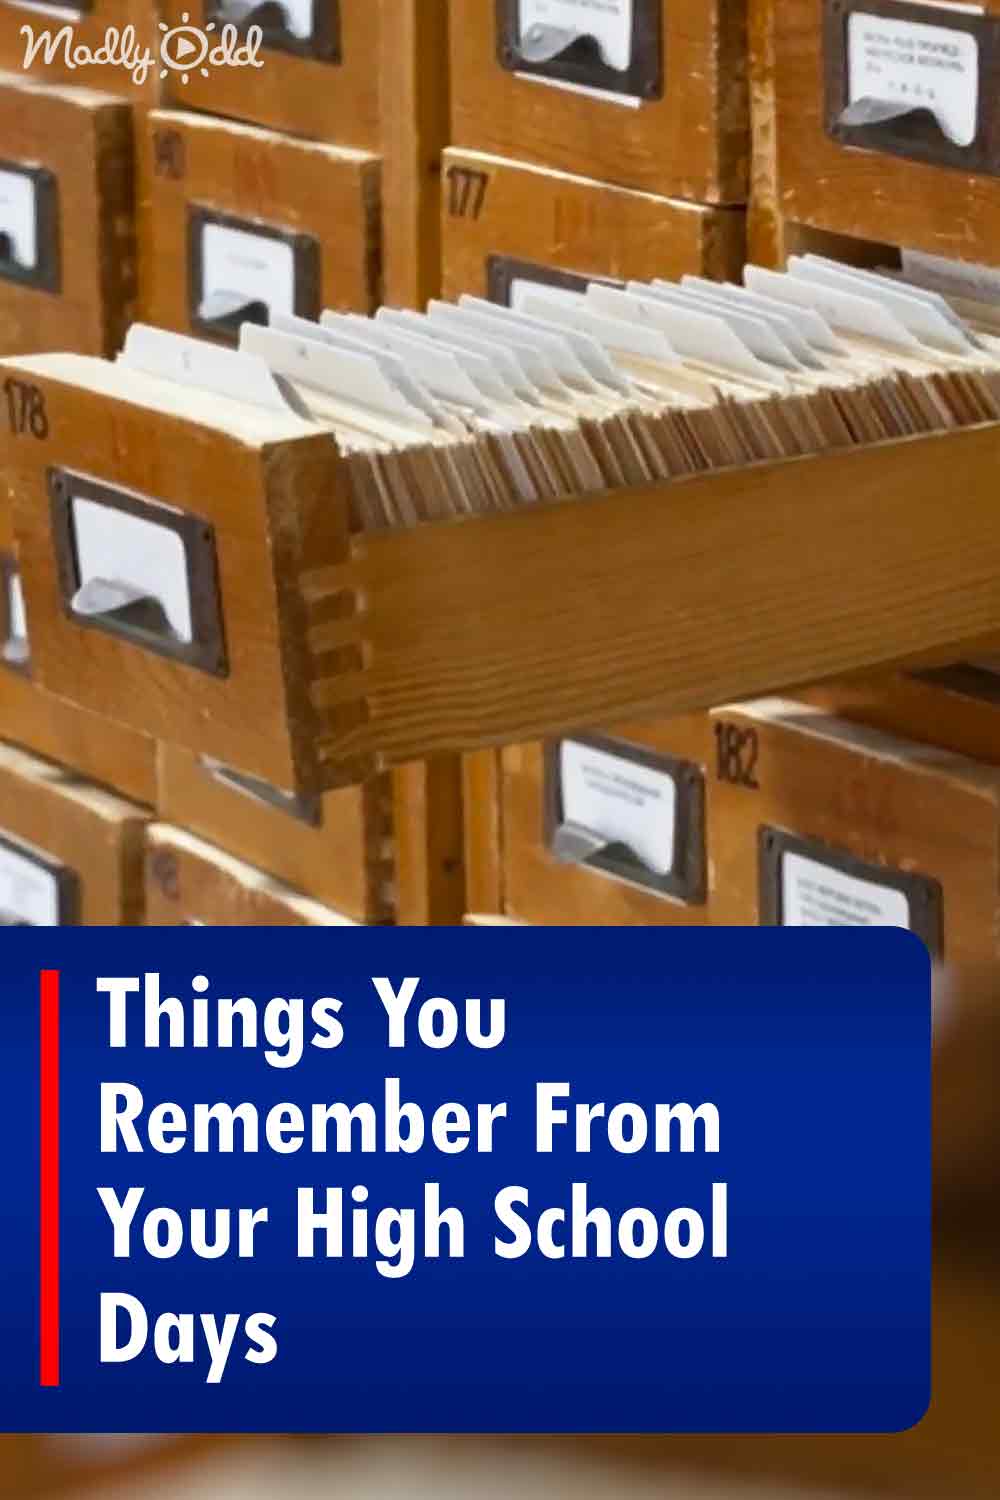 Things You Remember From Your High School Days